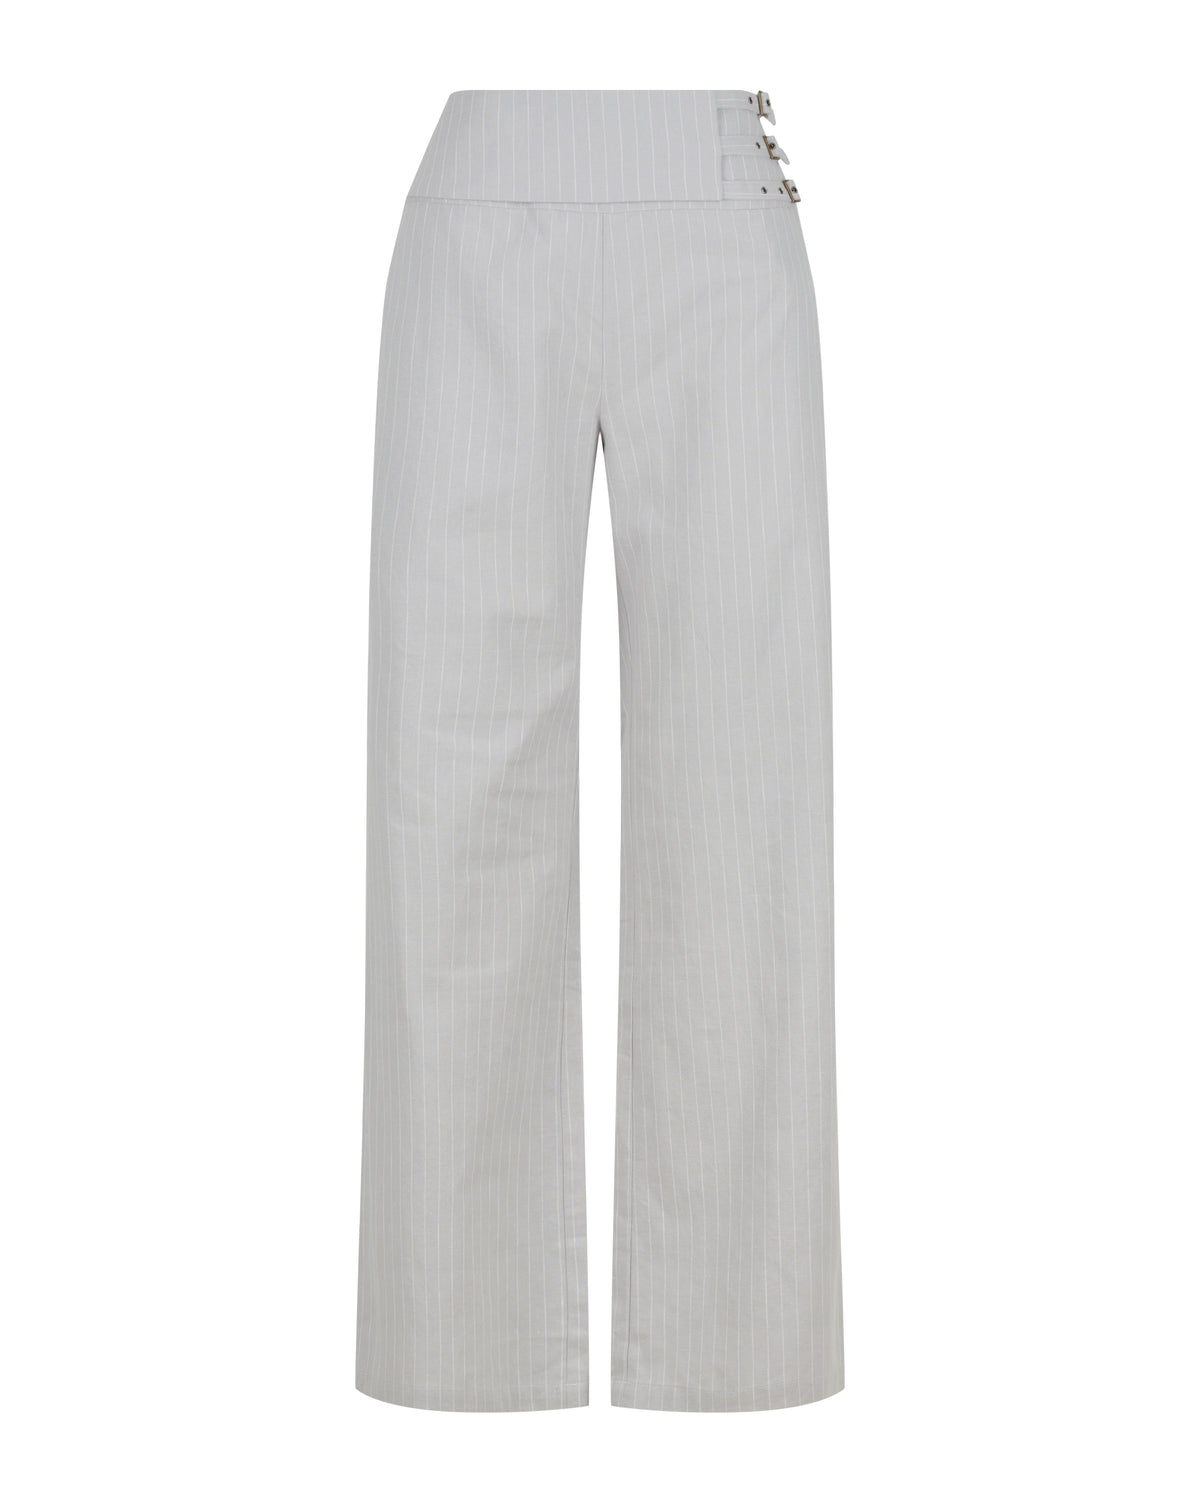 The Buckle Trouser